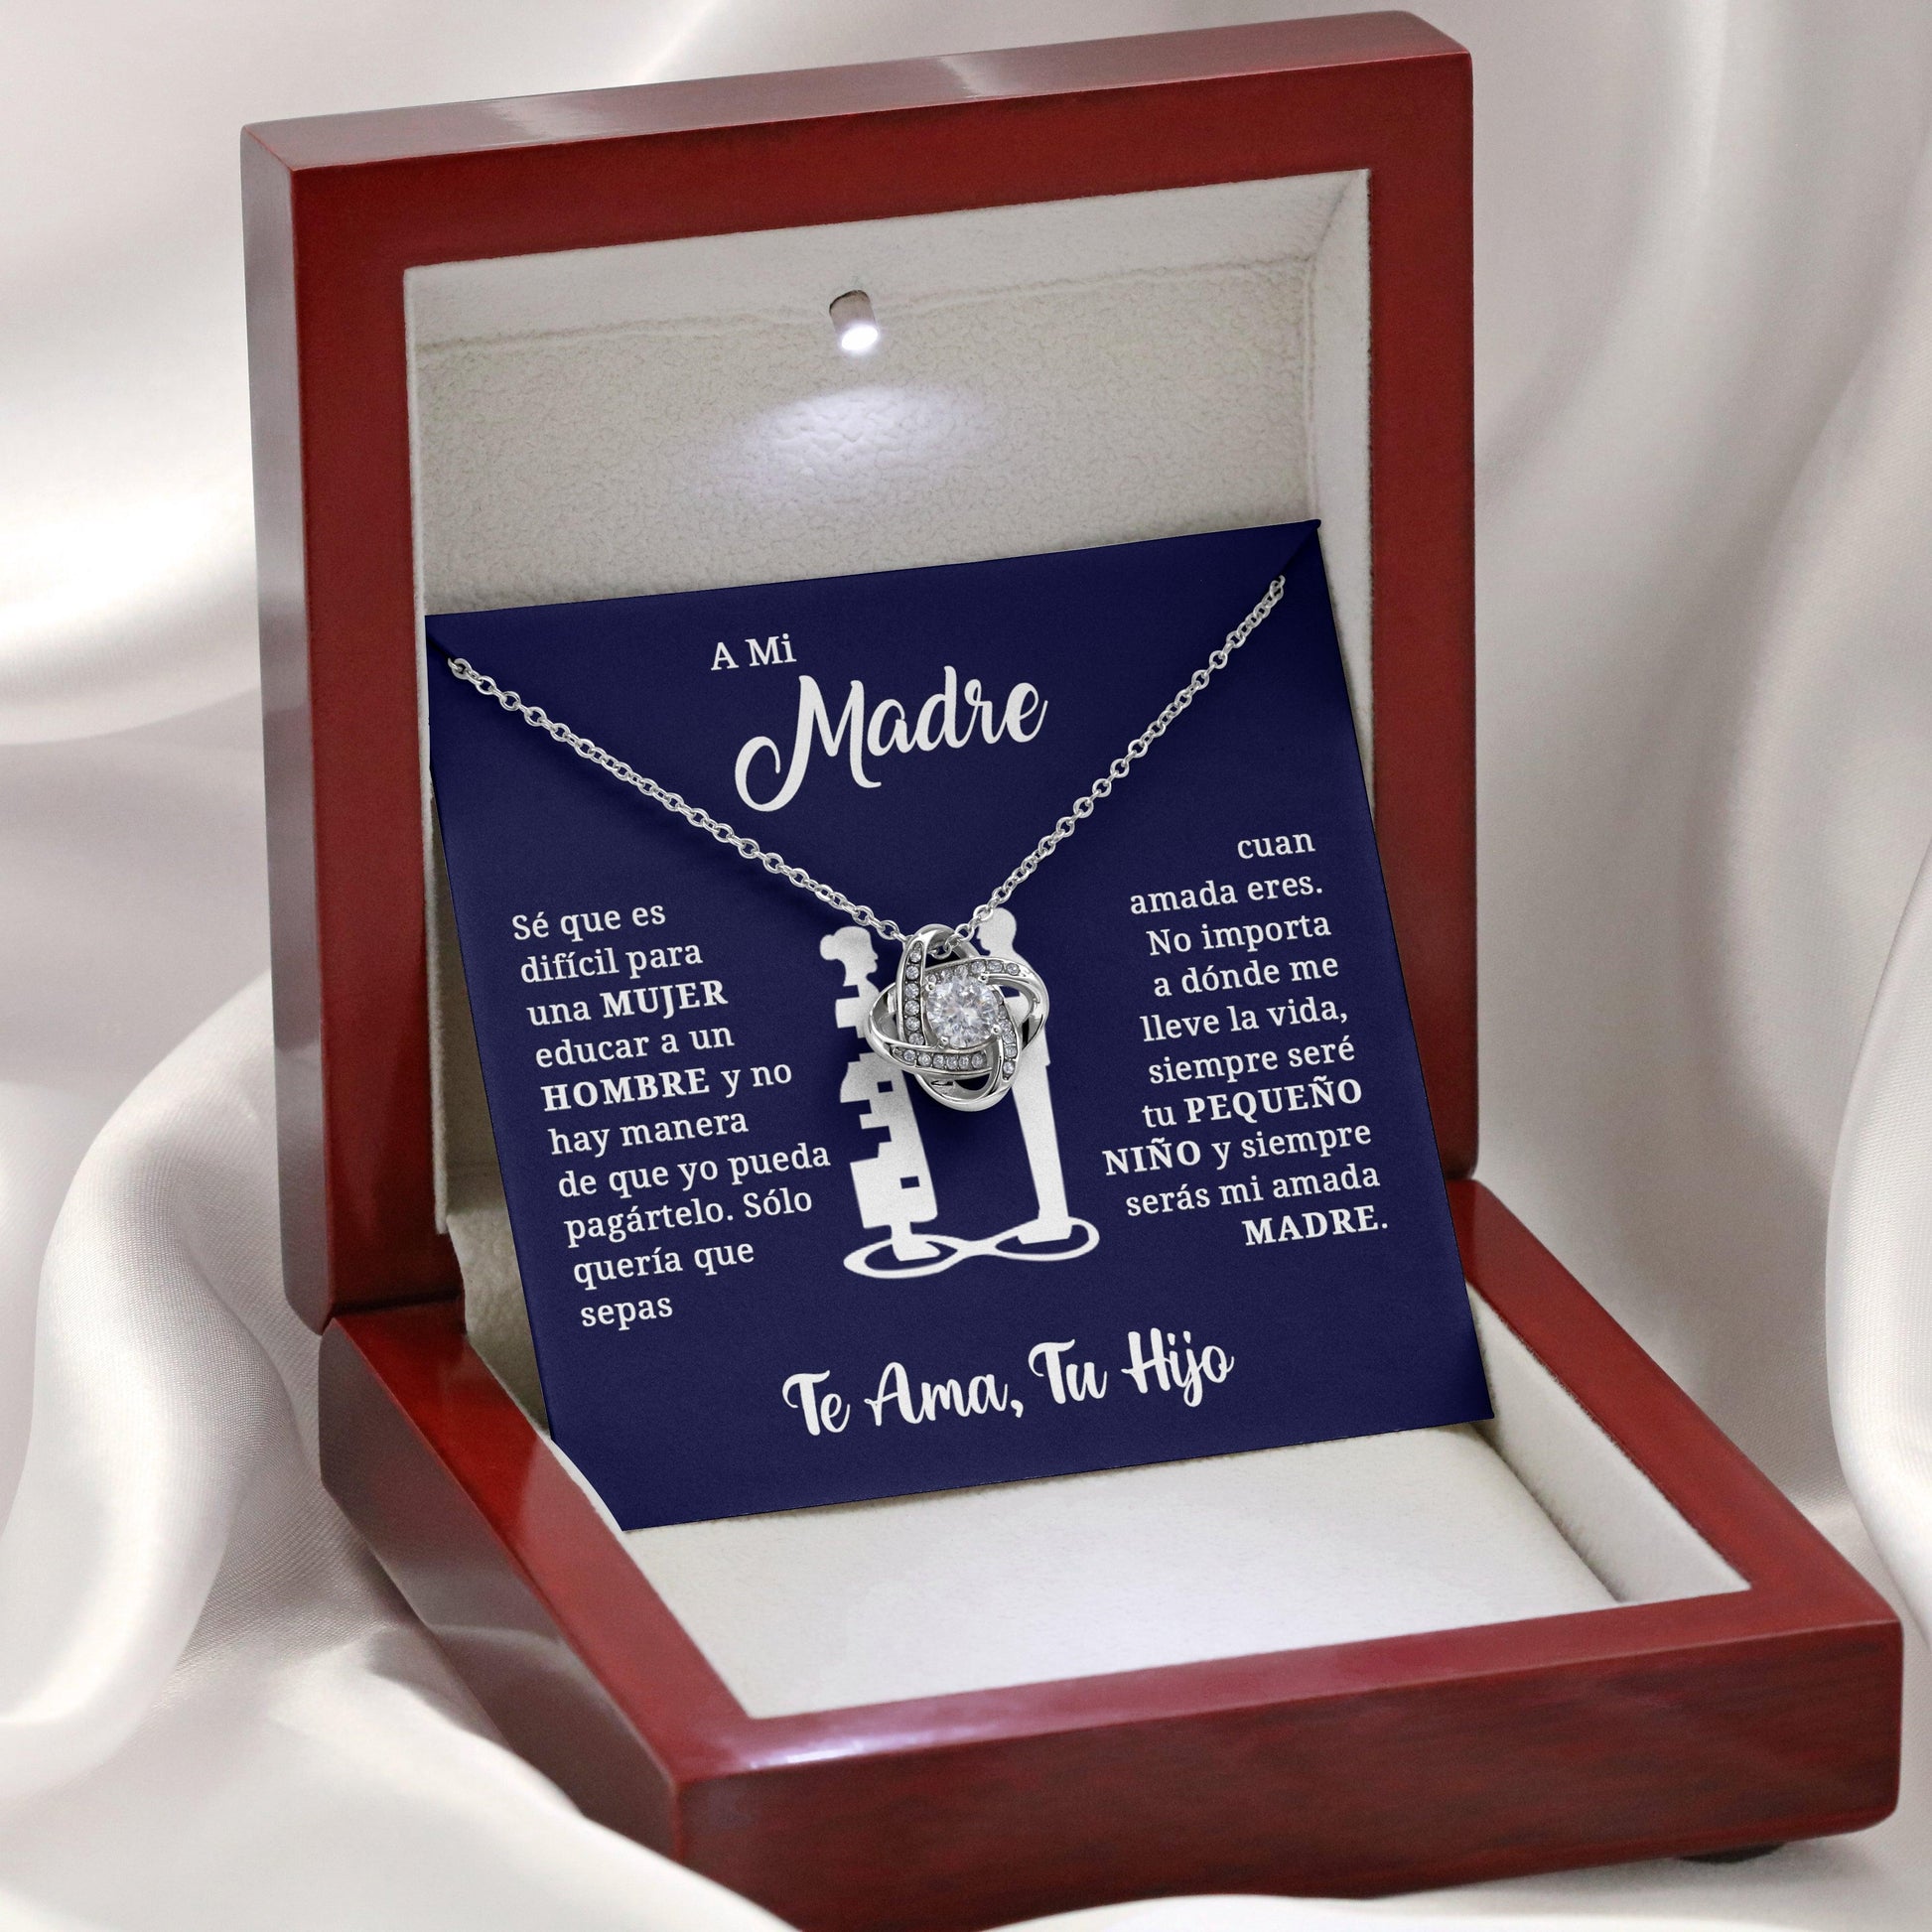 Jewelry gifts A MI MADRE - PEQUEÑO NIÑO -  Collar - Belesmé - Memorable Jewelry Gifts